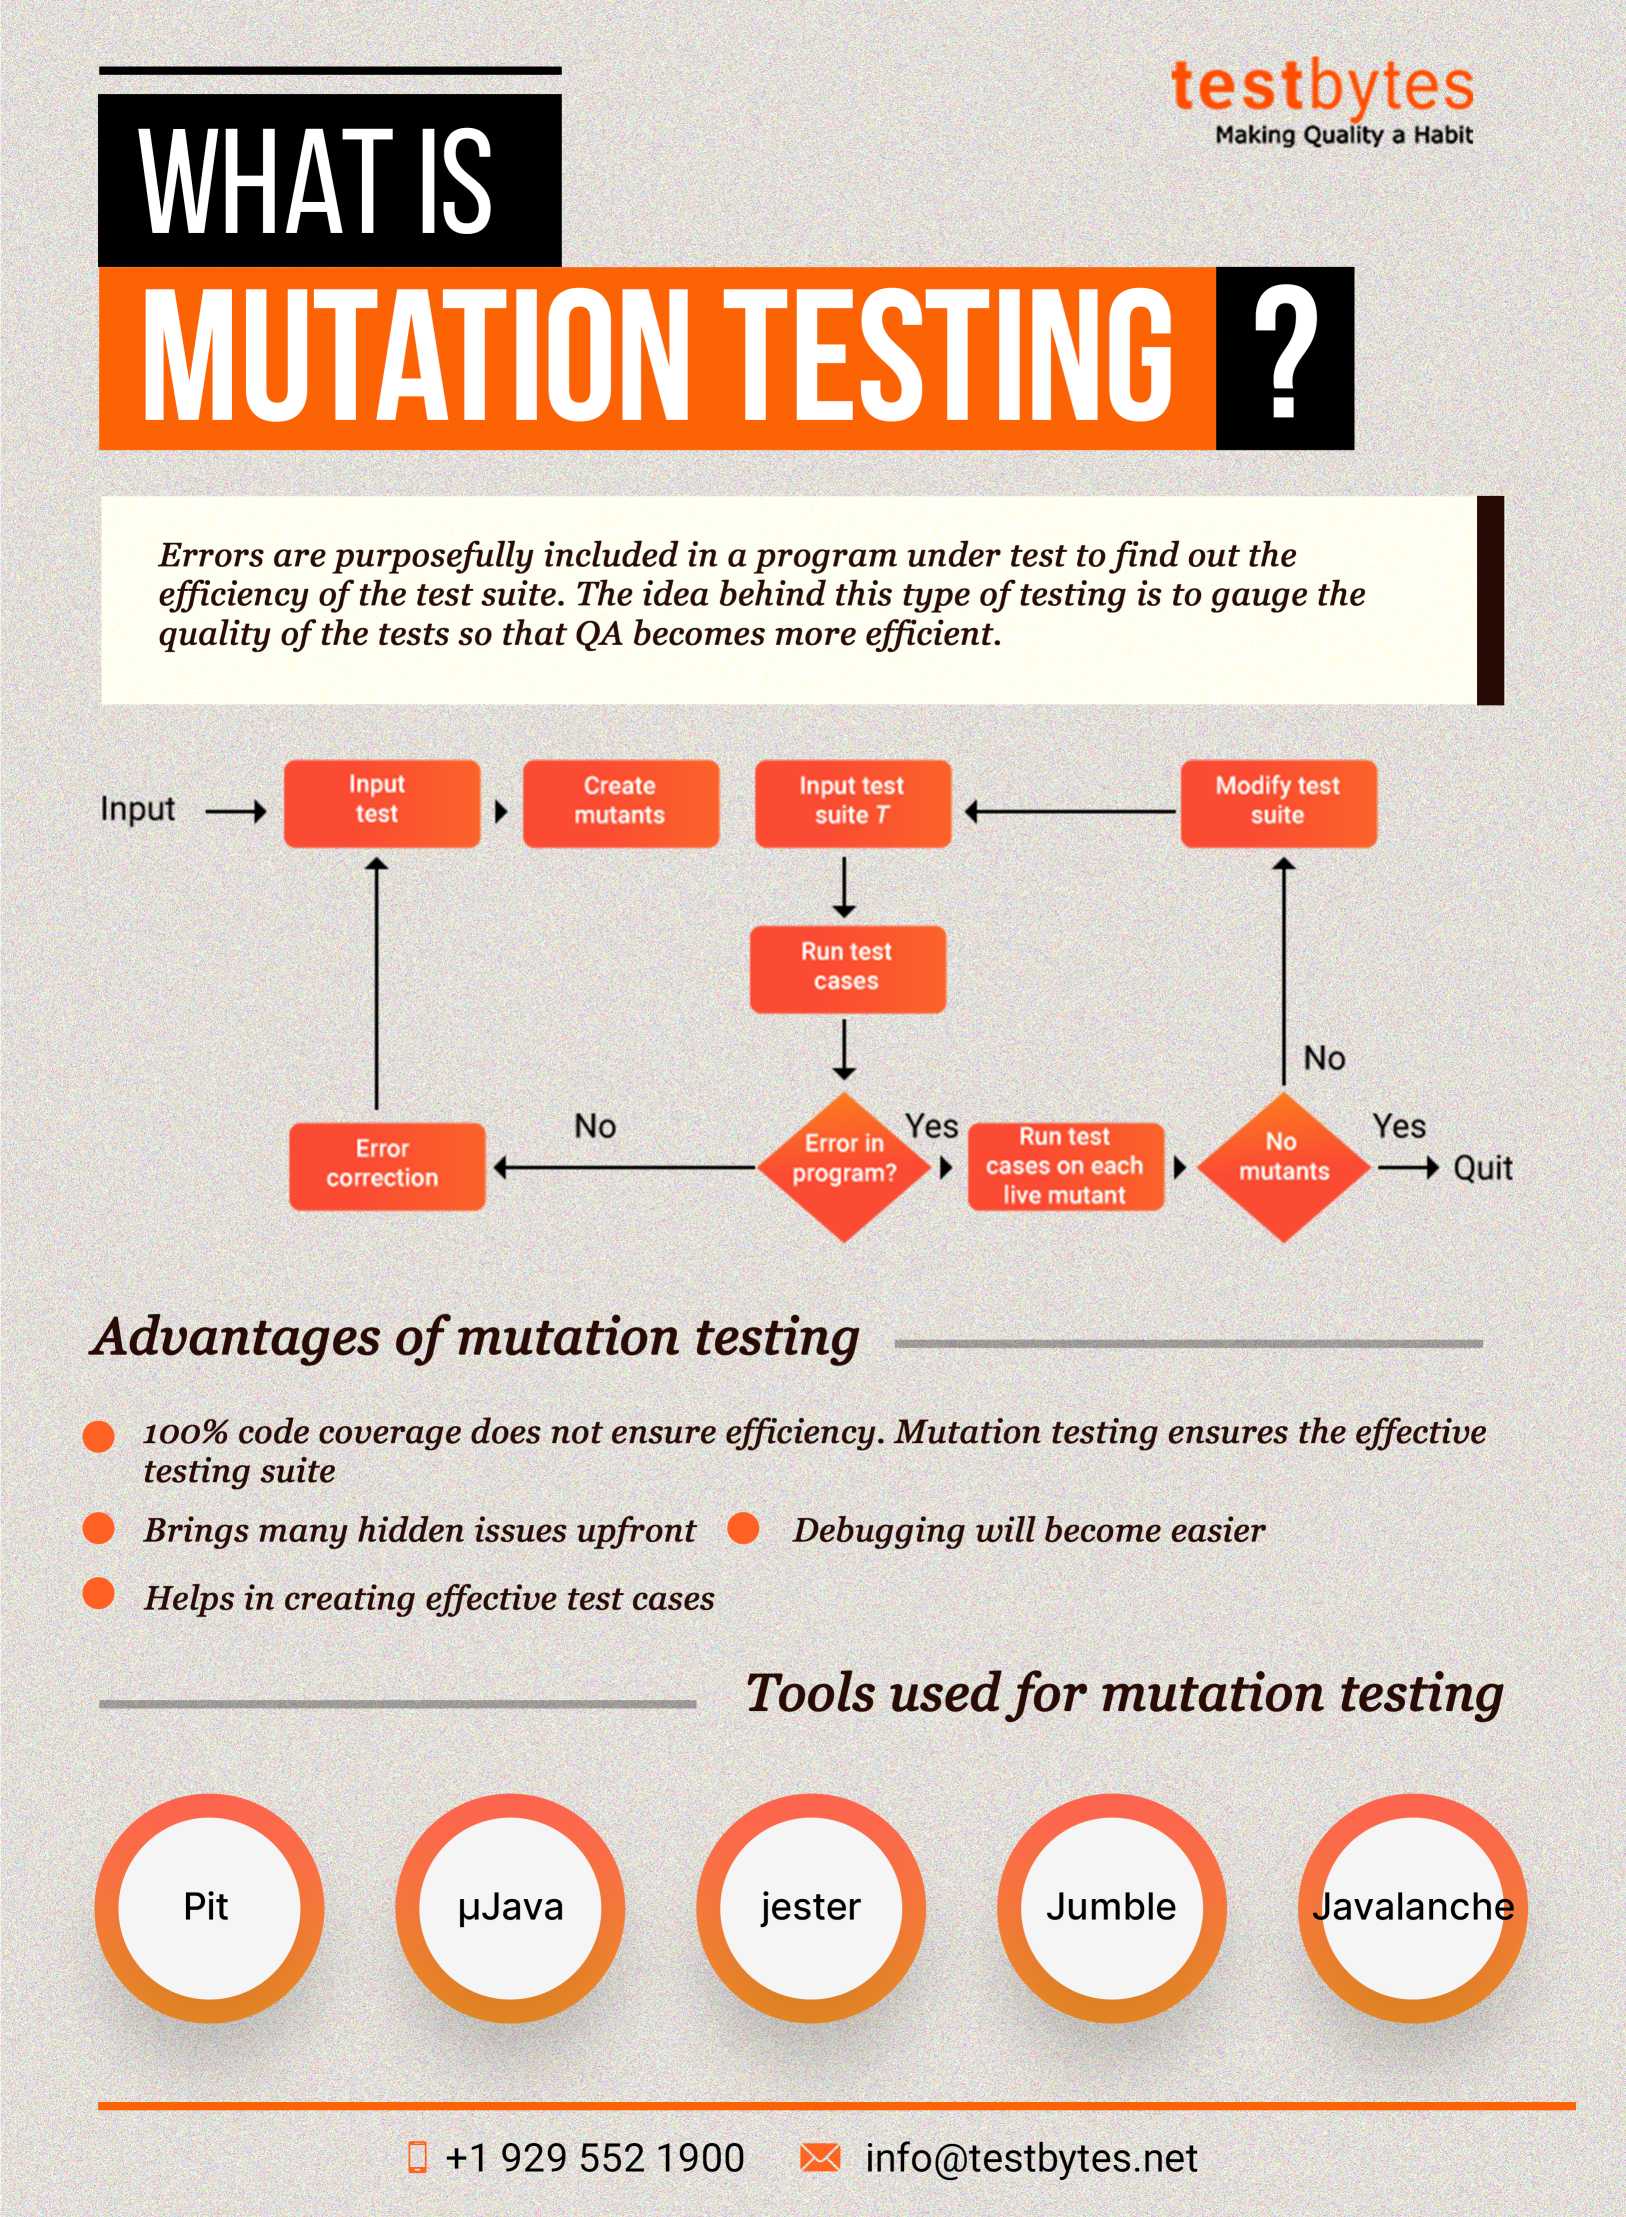 What is mutation testing